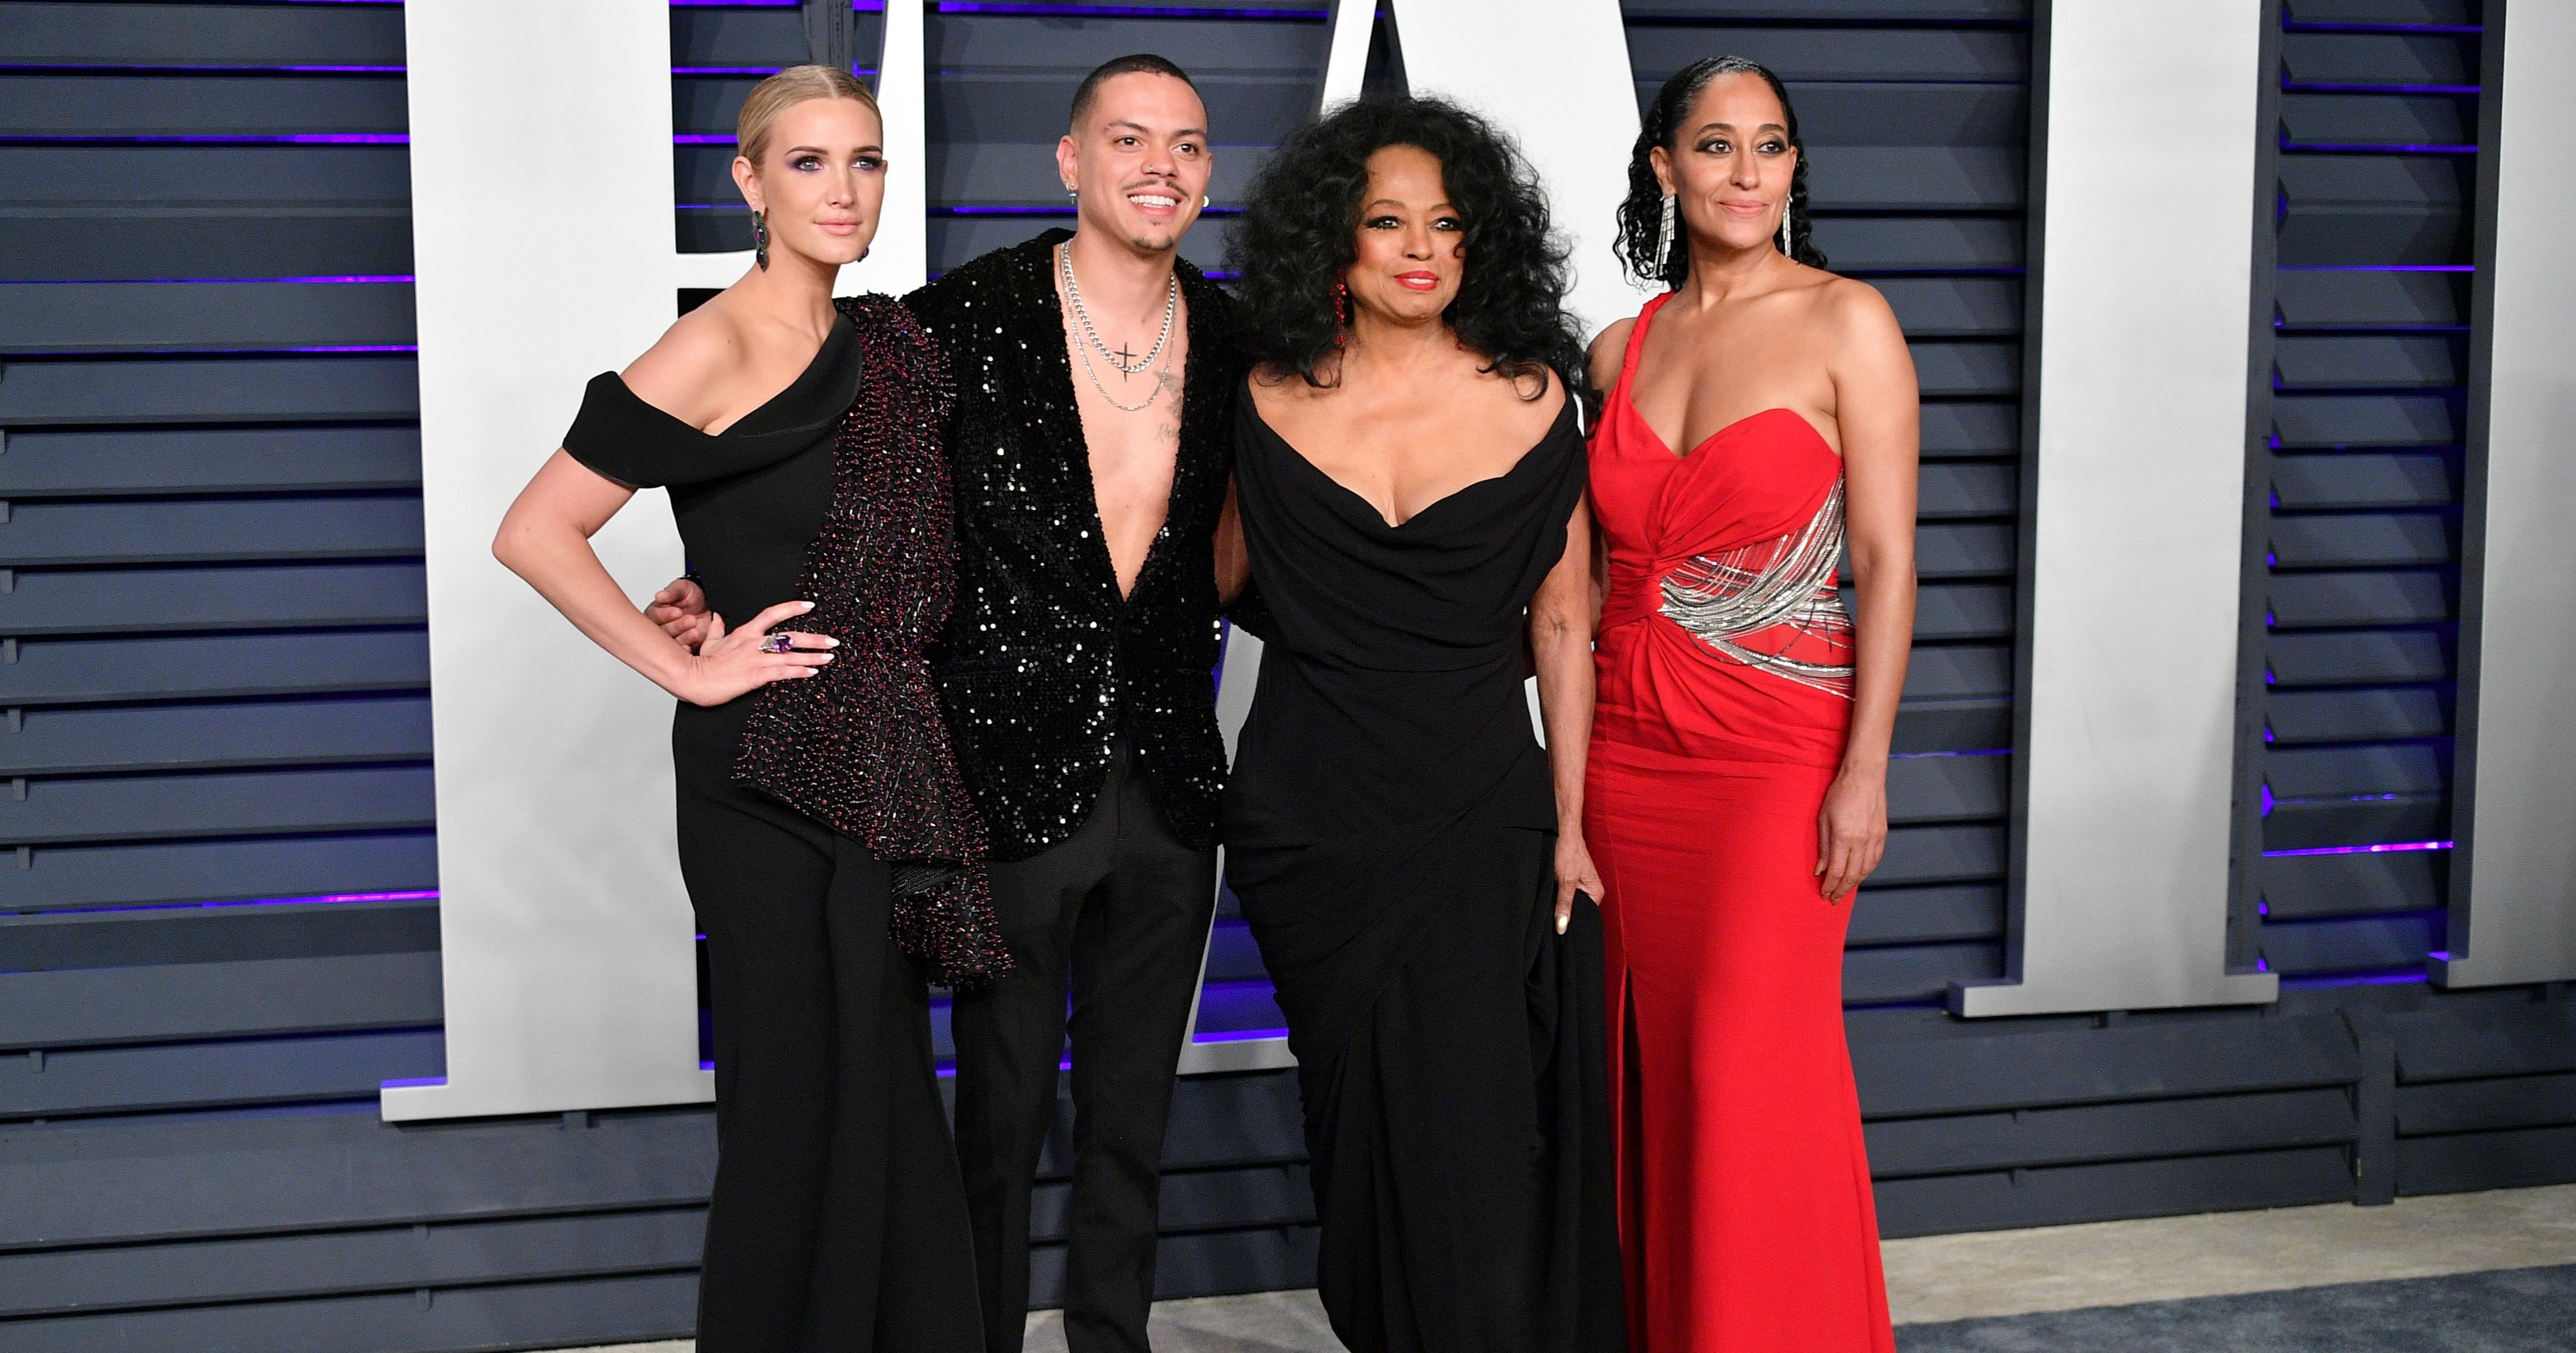 Diana Ross and Her Family at 2019 Oscars Afterparty | POPSUGAR Celebrity